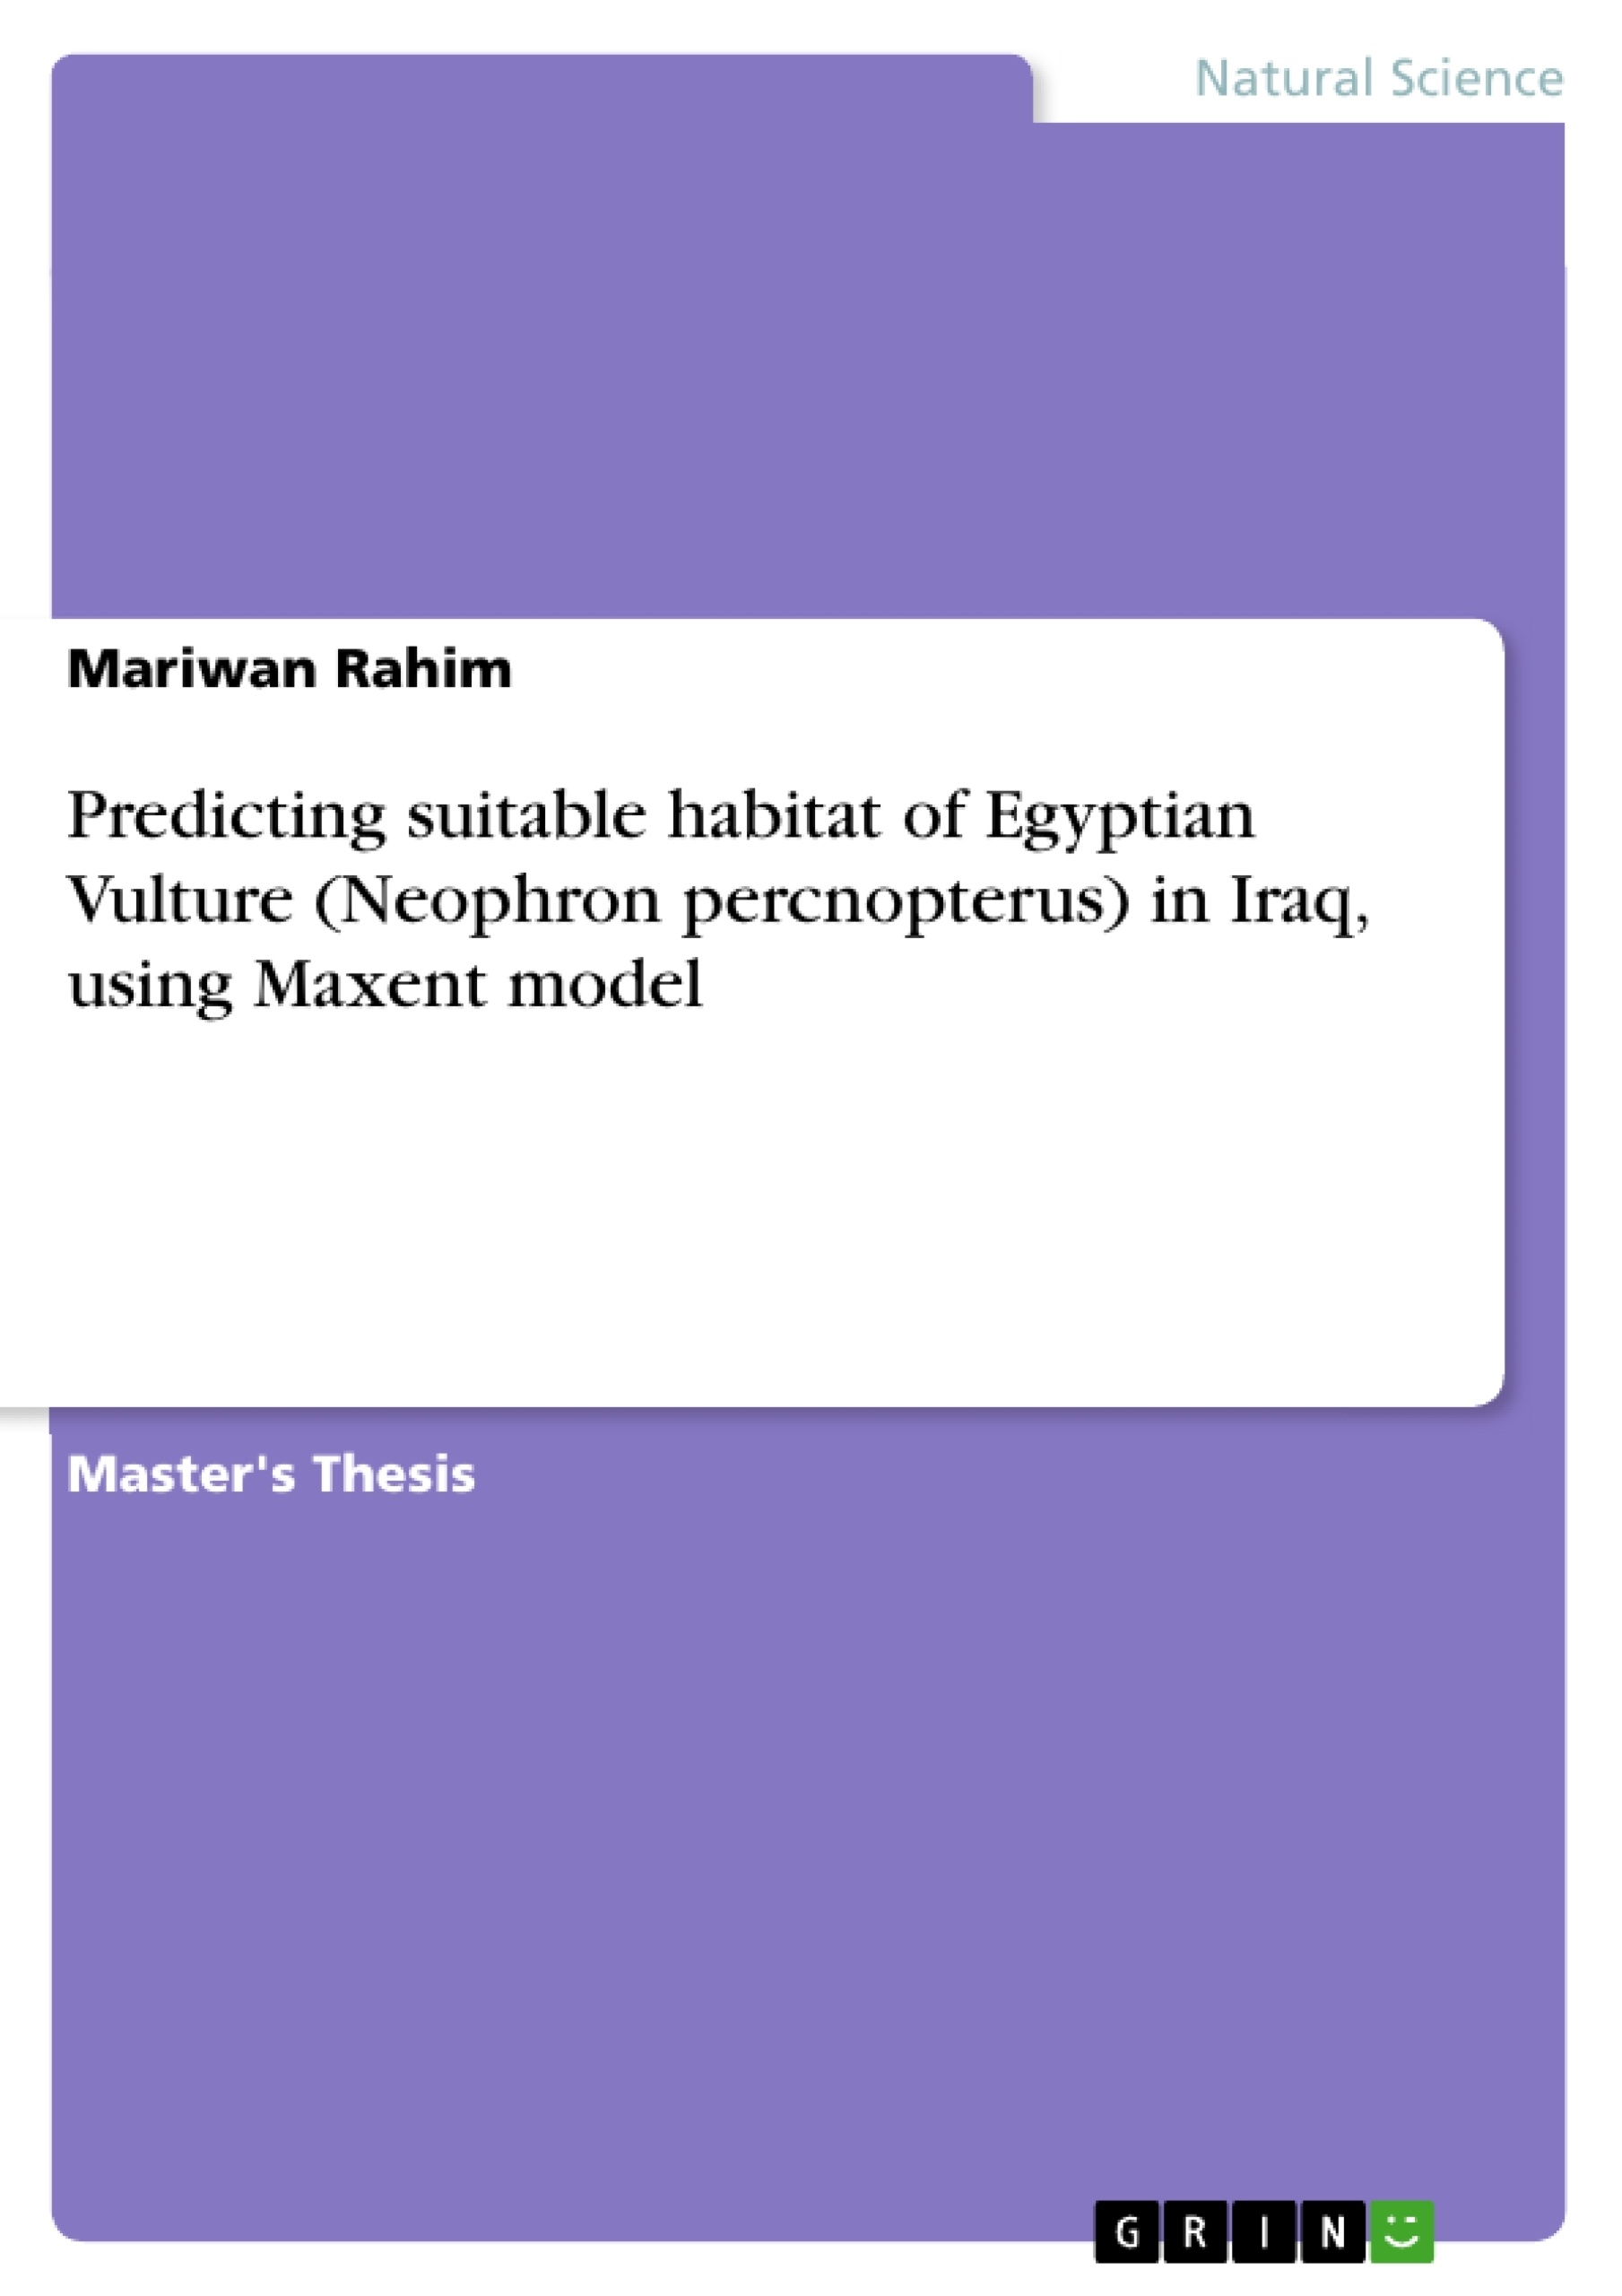 Título: Predicting suitable habitat of Egyptian Vulture (Neophron percnopterus) in Iraq, using Maxent model